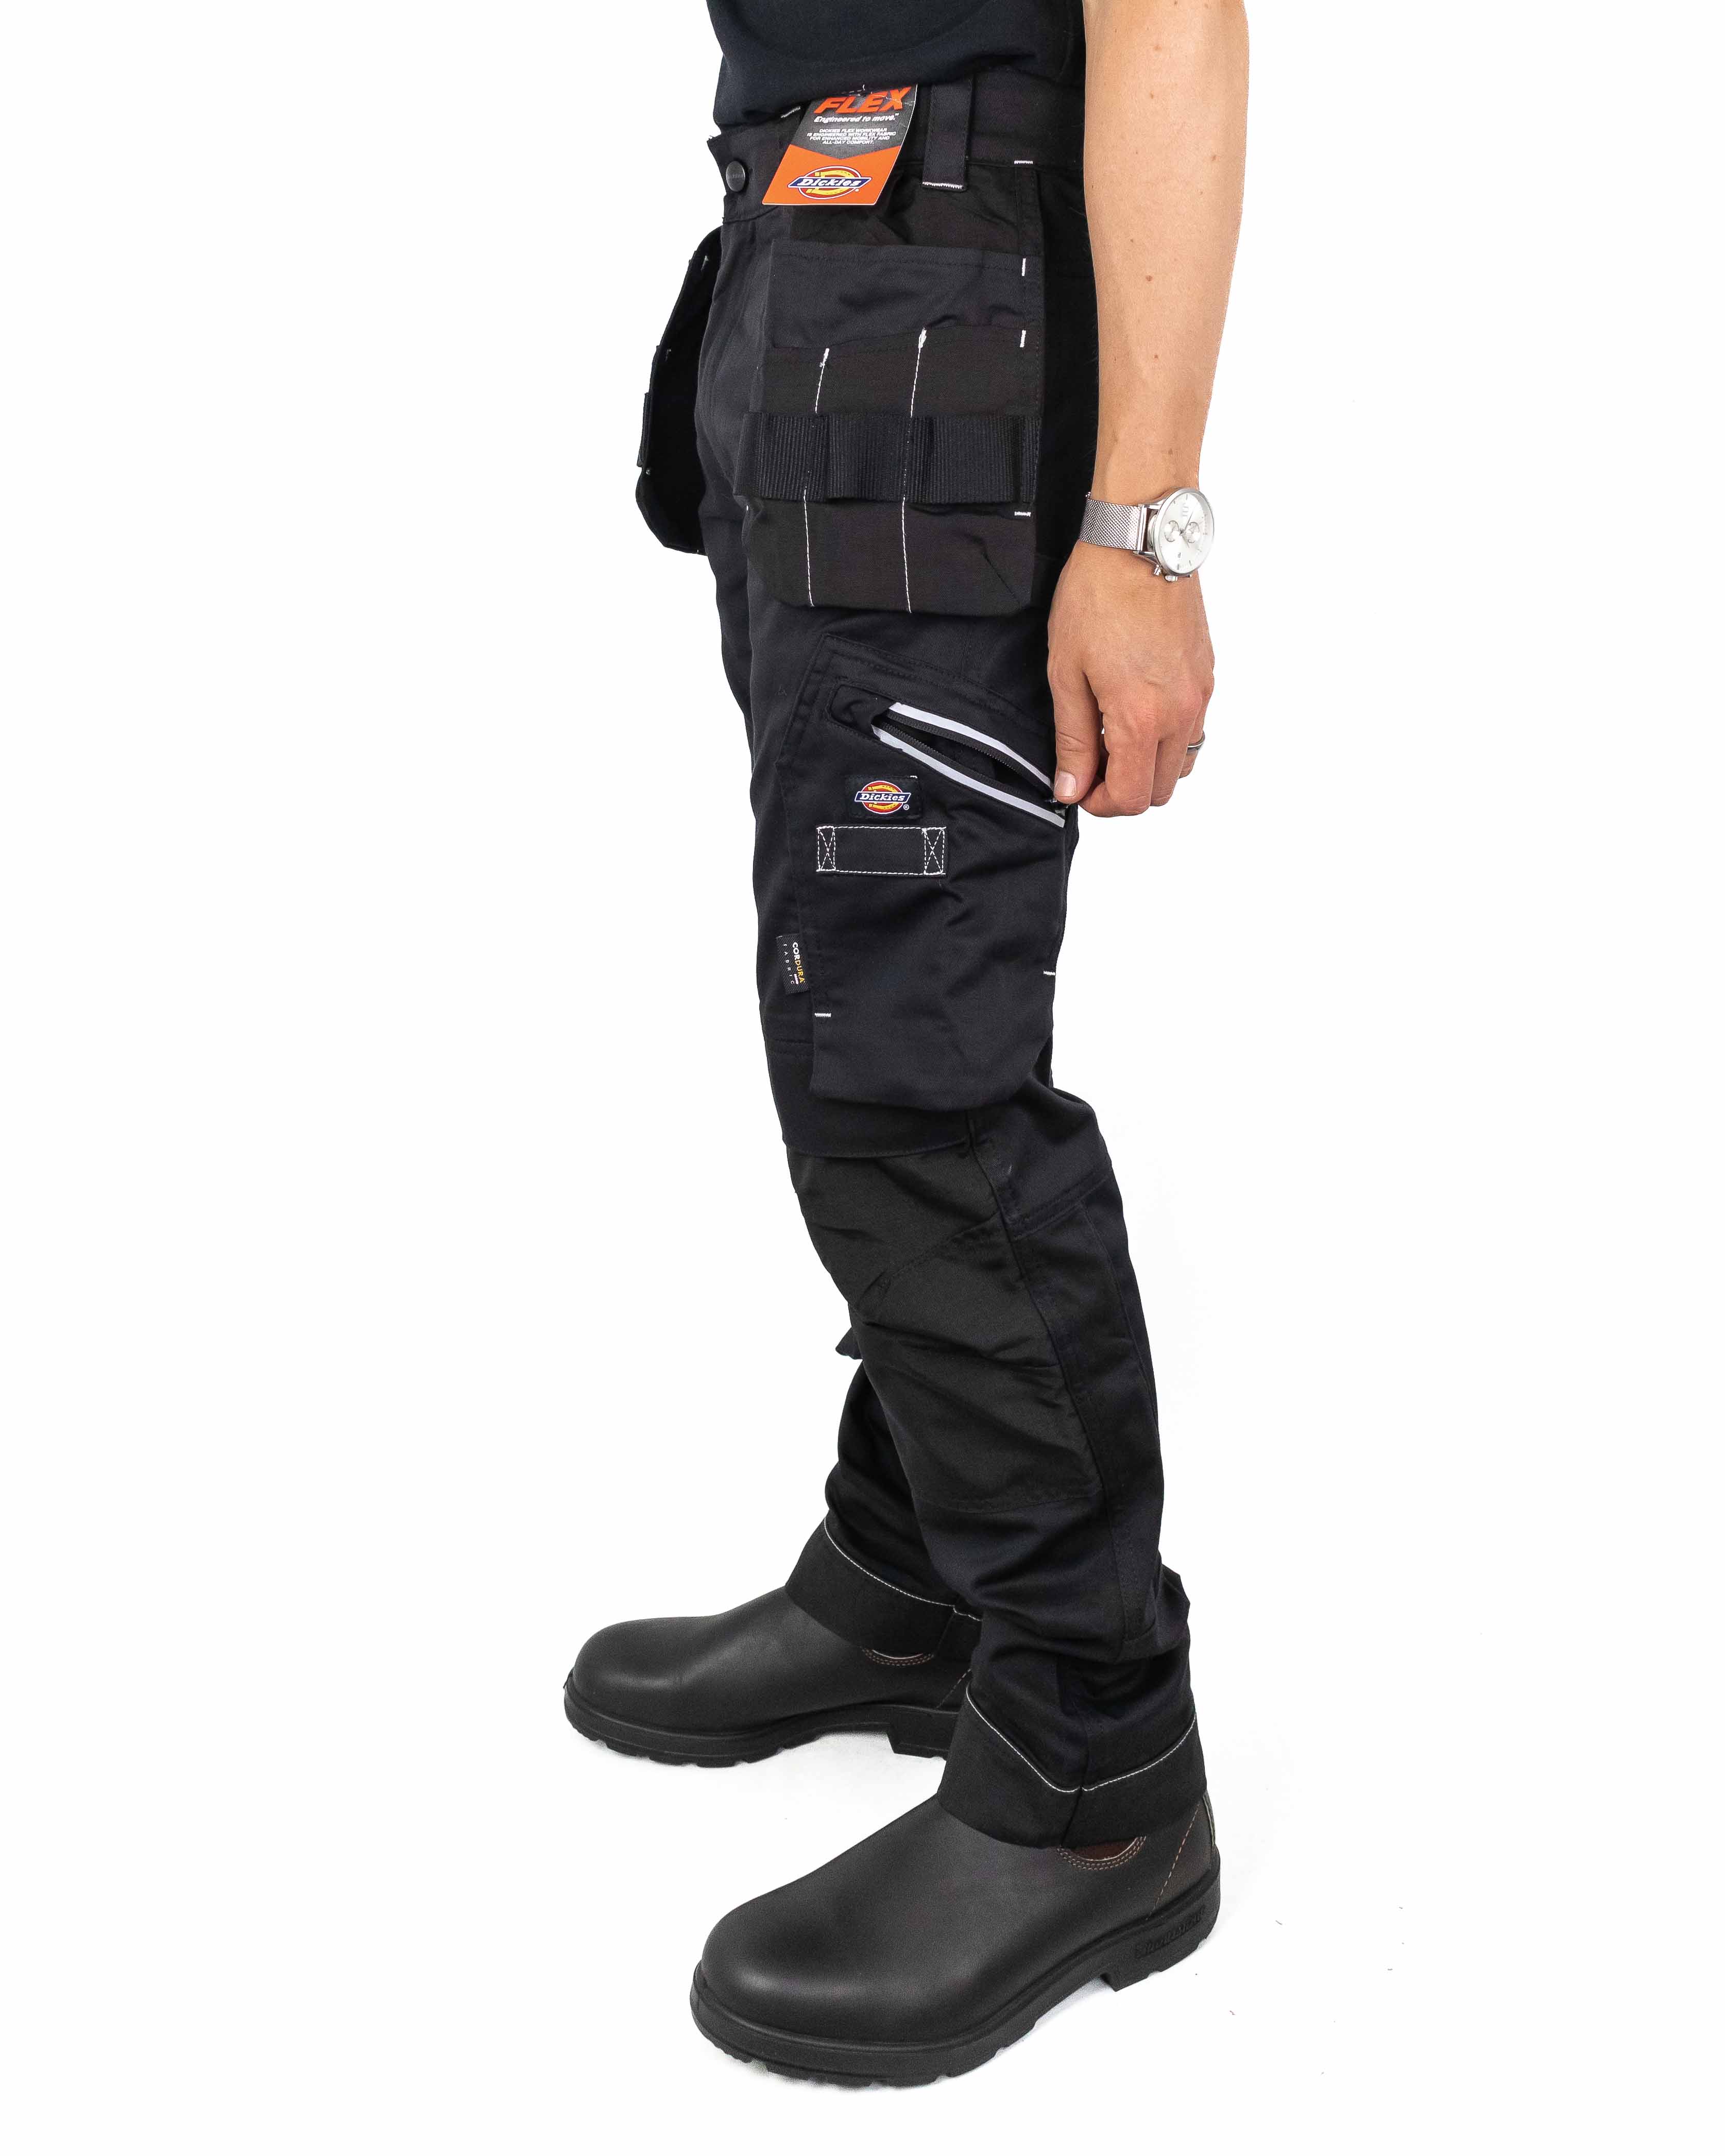 Dickies Redhawk Super Work Trousers  Black  SHOP ALL WORKWEAR from Simon  Jersey UK